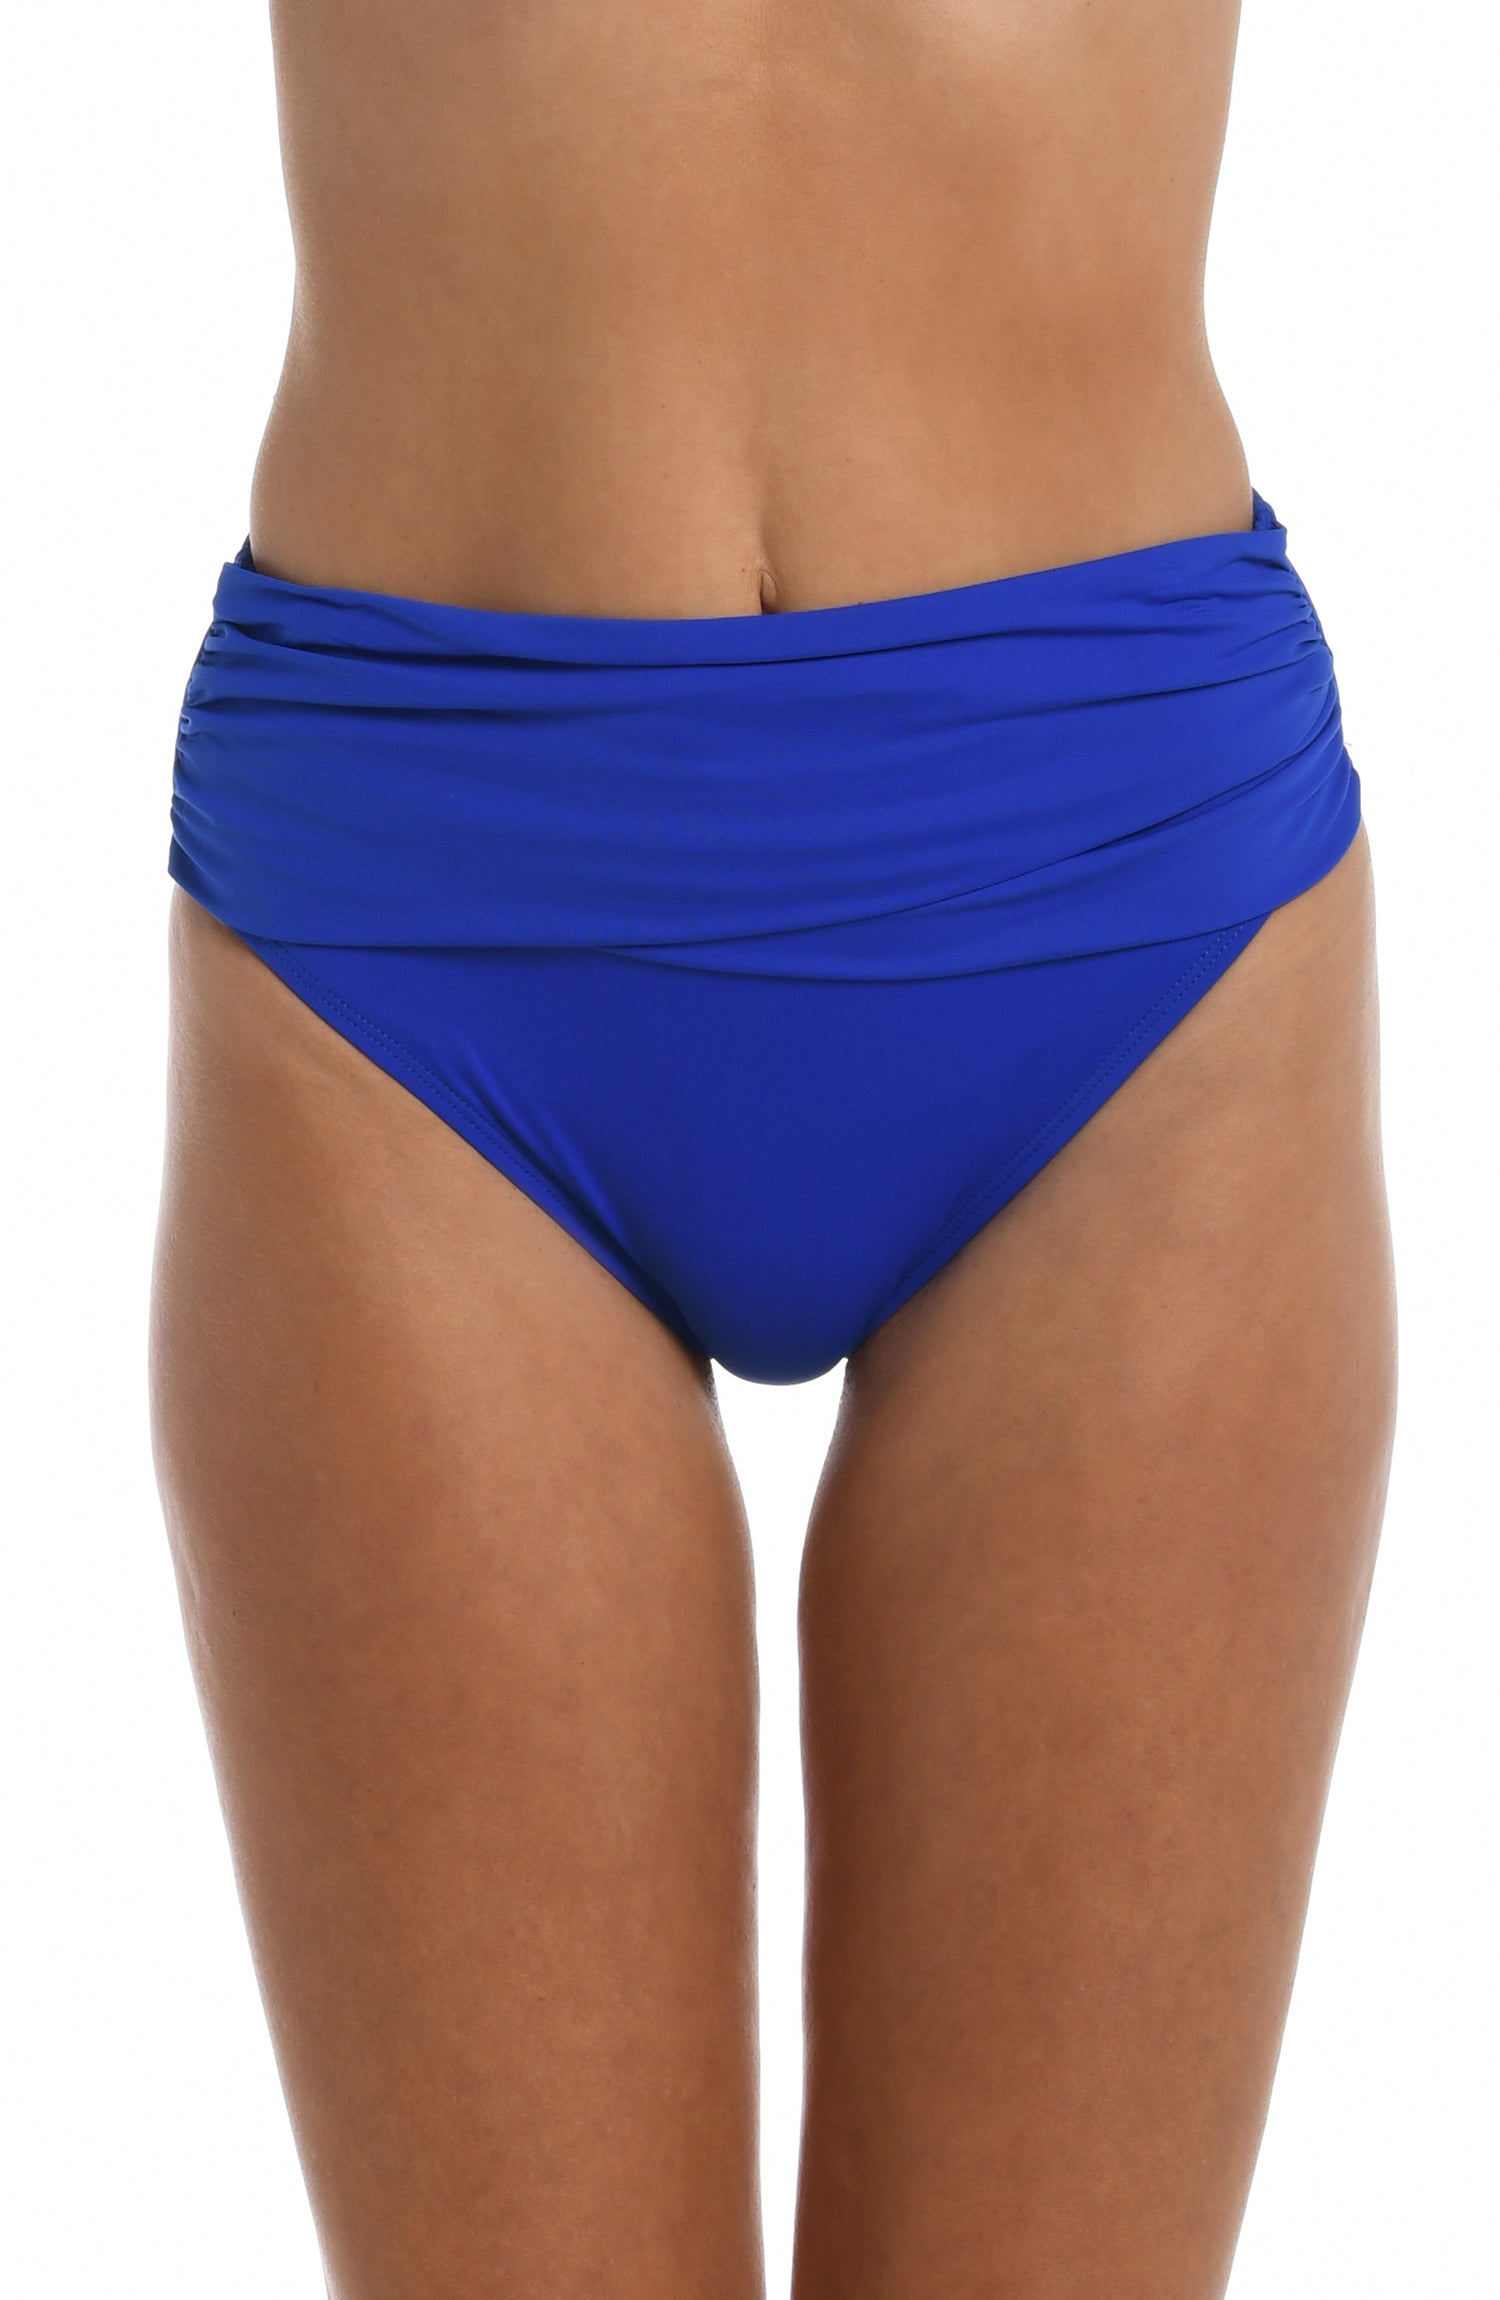 Model is wearing a sapphire colored mid-waist swimsuit bottom from our Best-Selling Island Goddess collection.